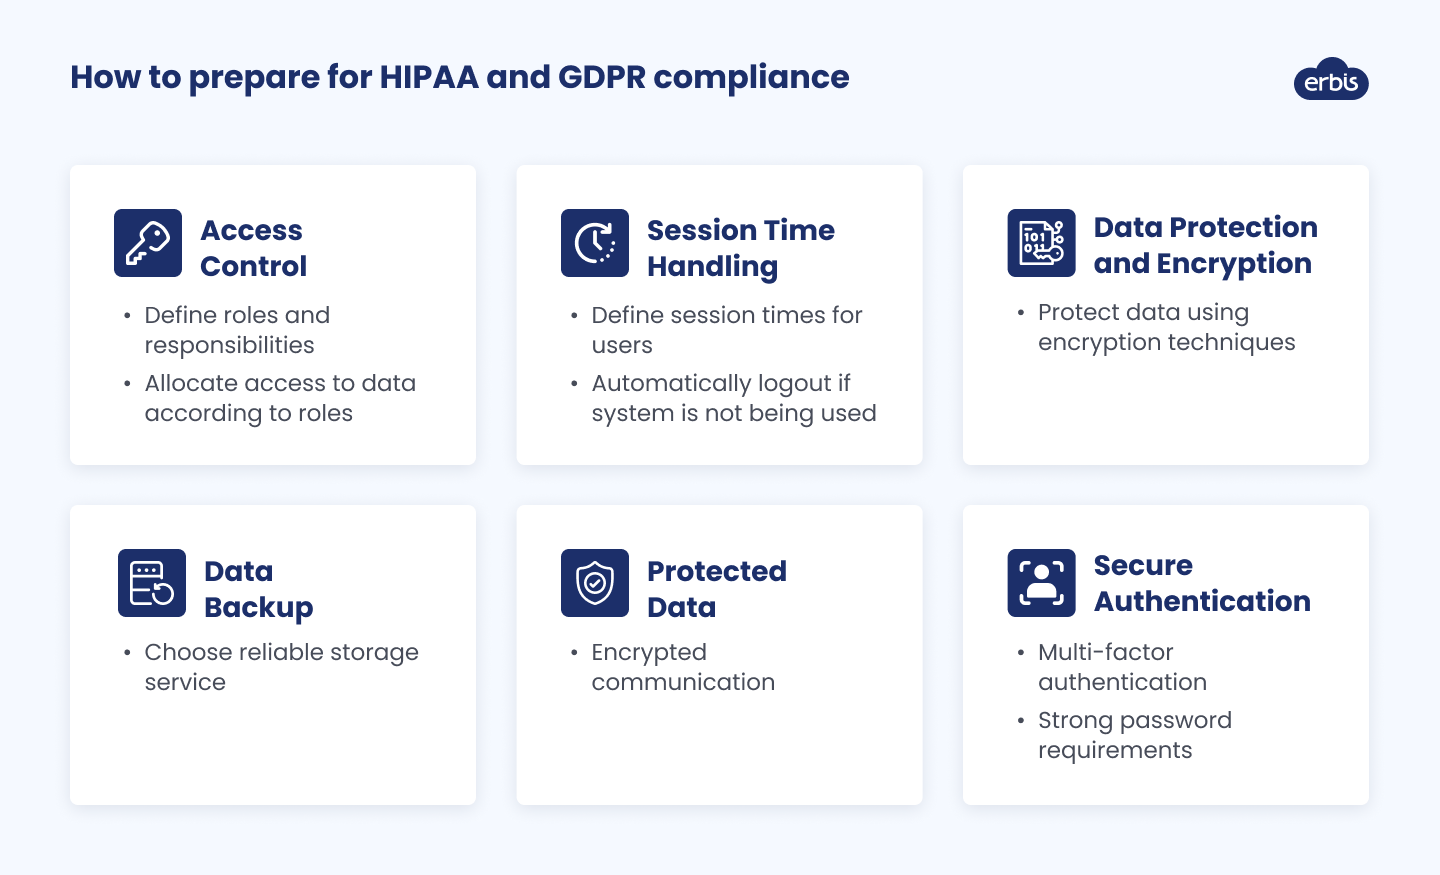 How to prepare for HIPAA and GDPR compliance